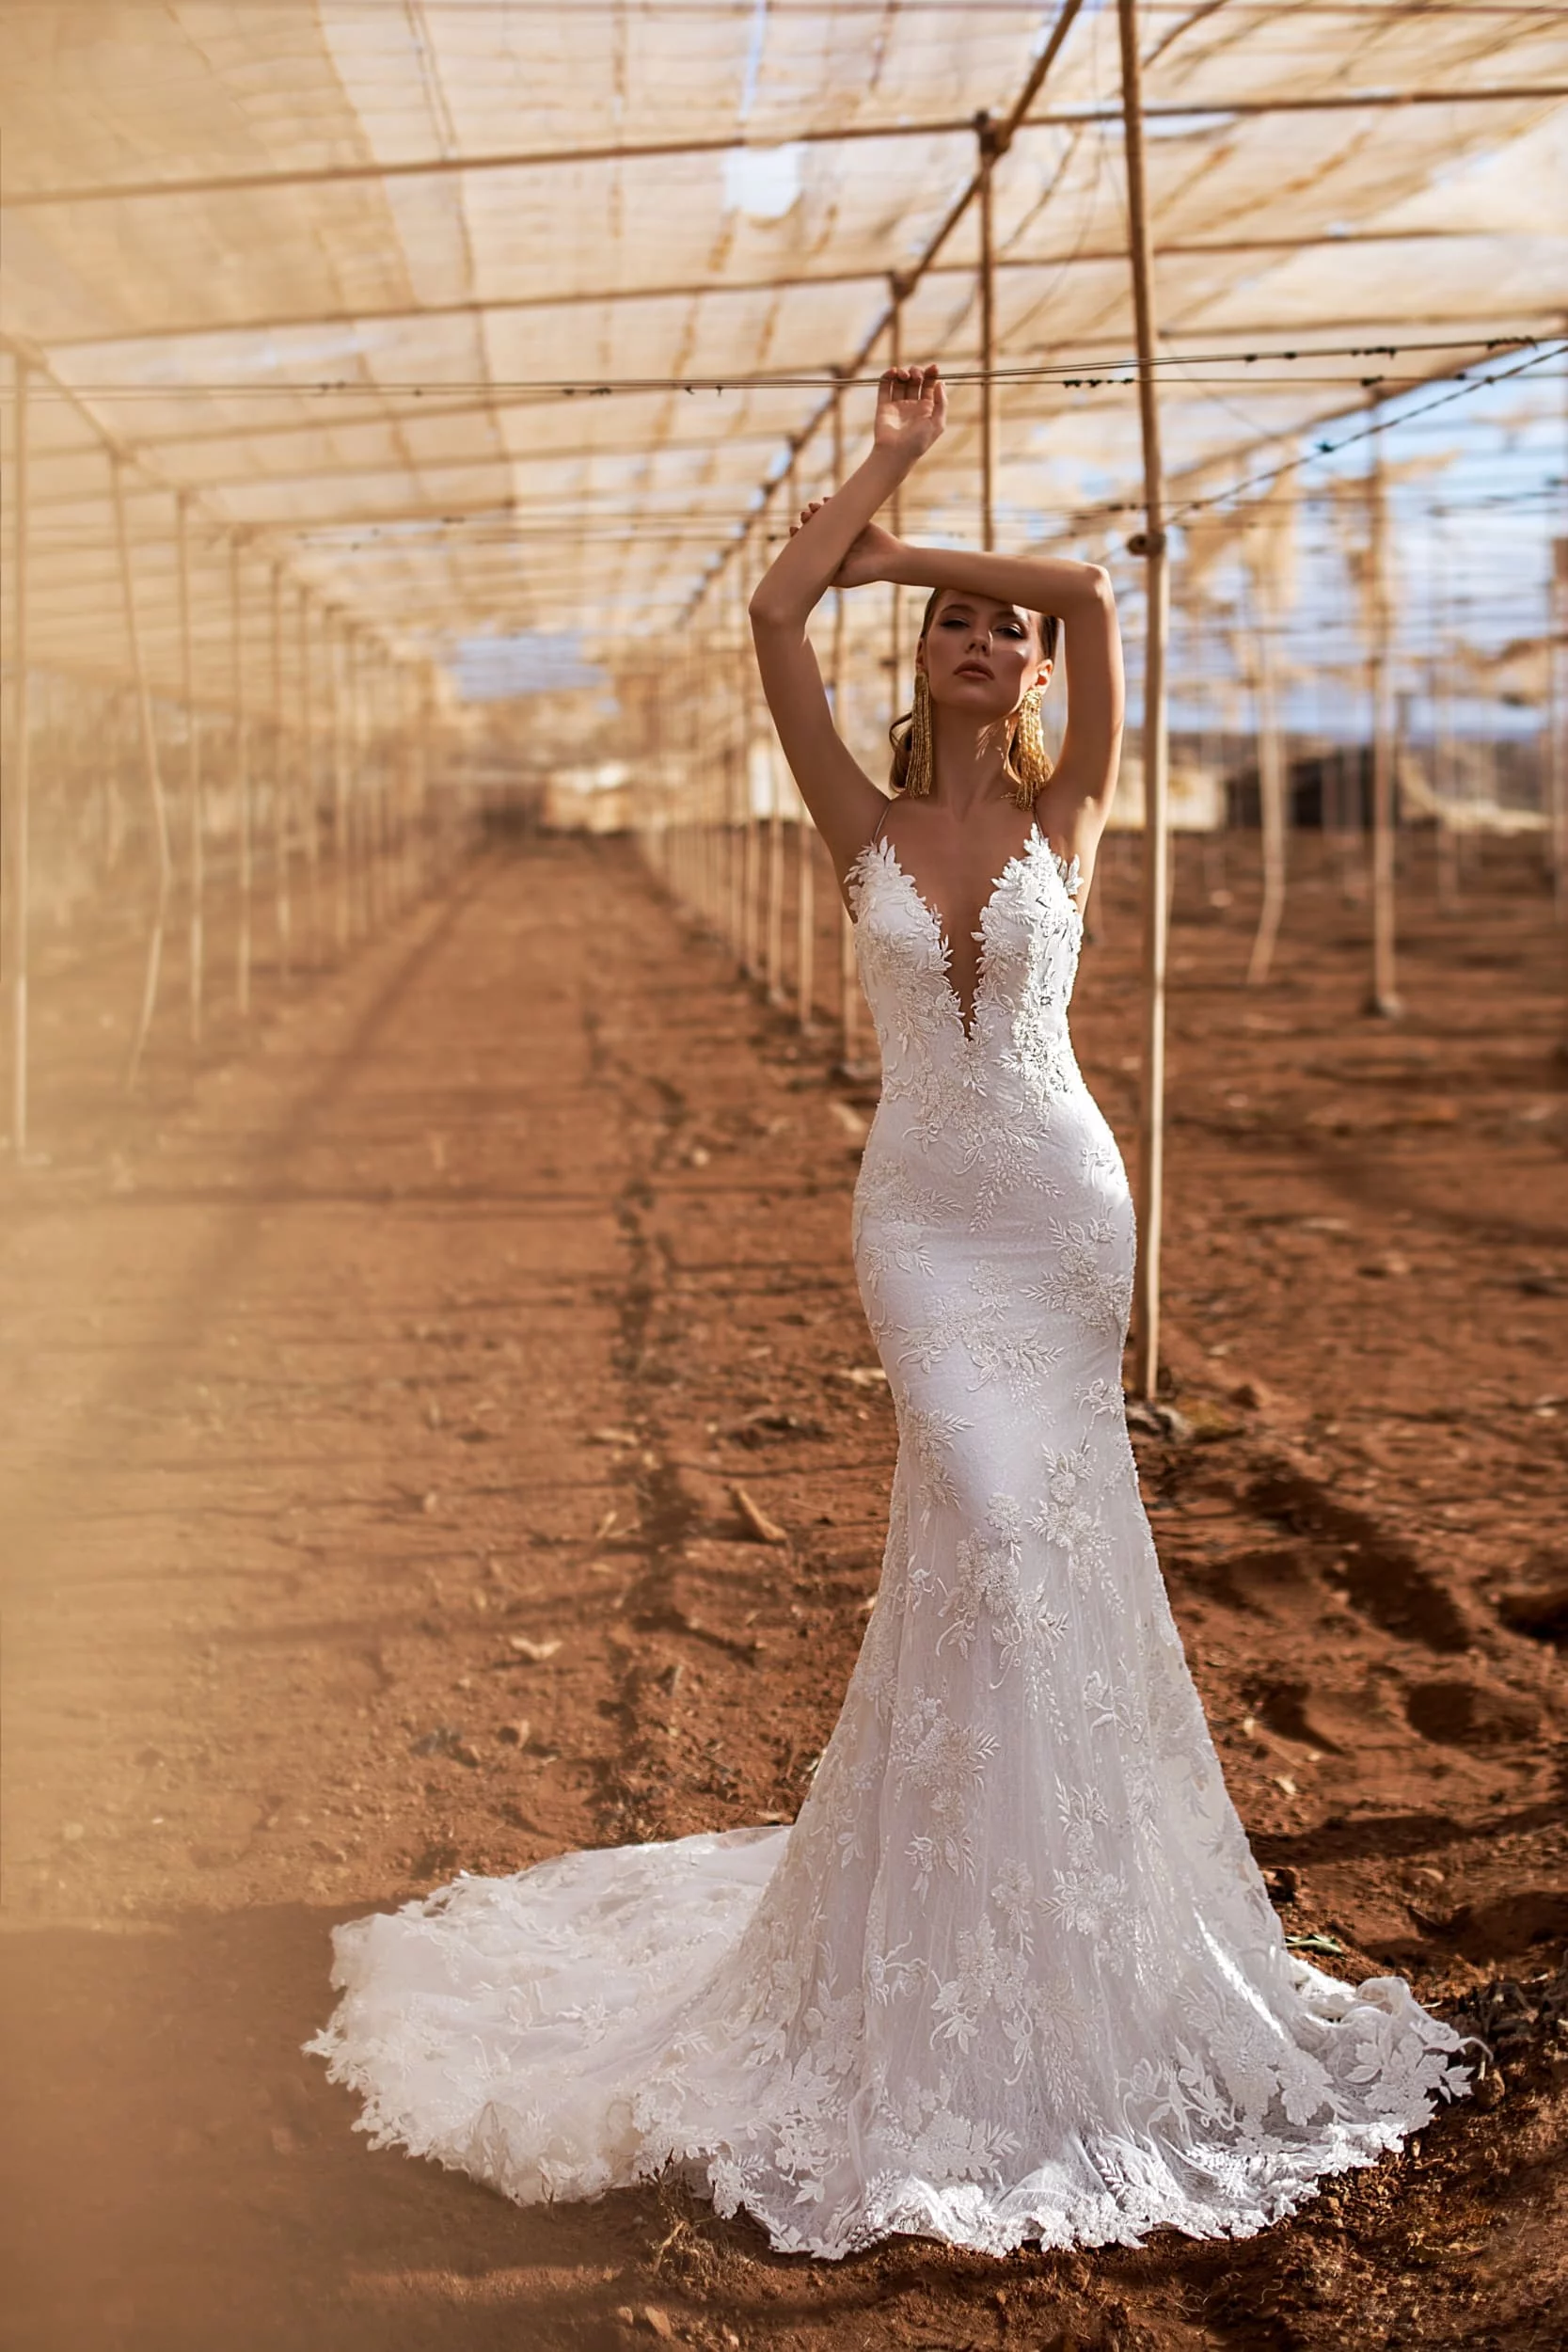 Spaghetti Strap Lace Fit And Flare Wedding Dress With Plunging Neckline And  Open Back